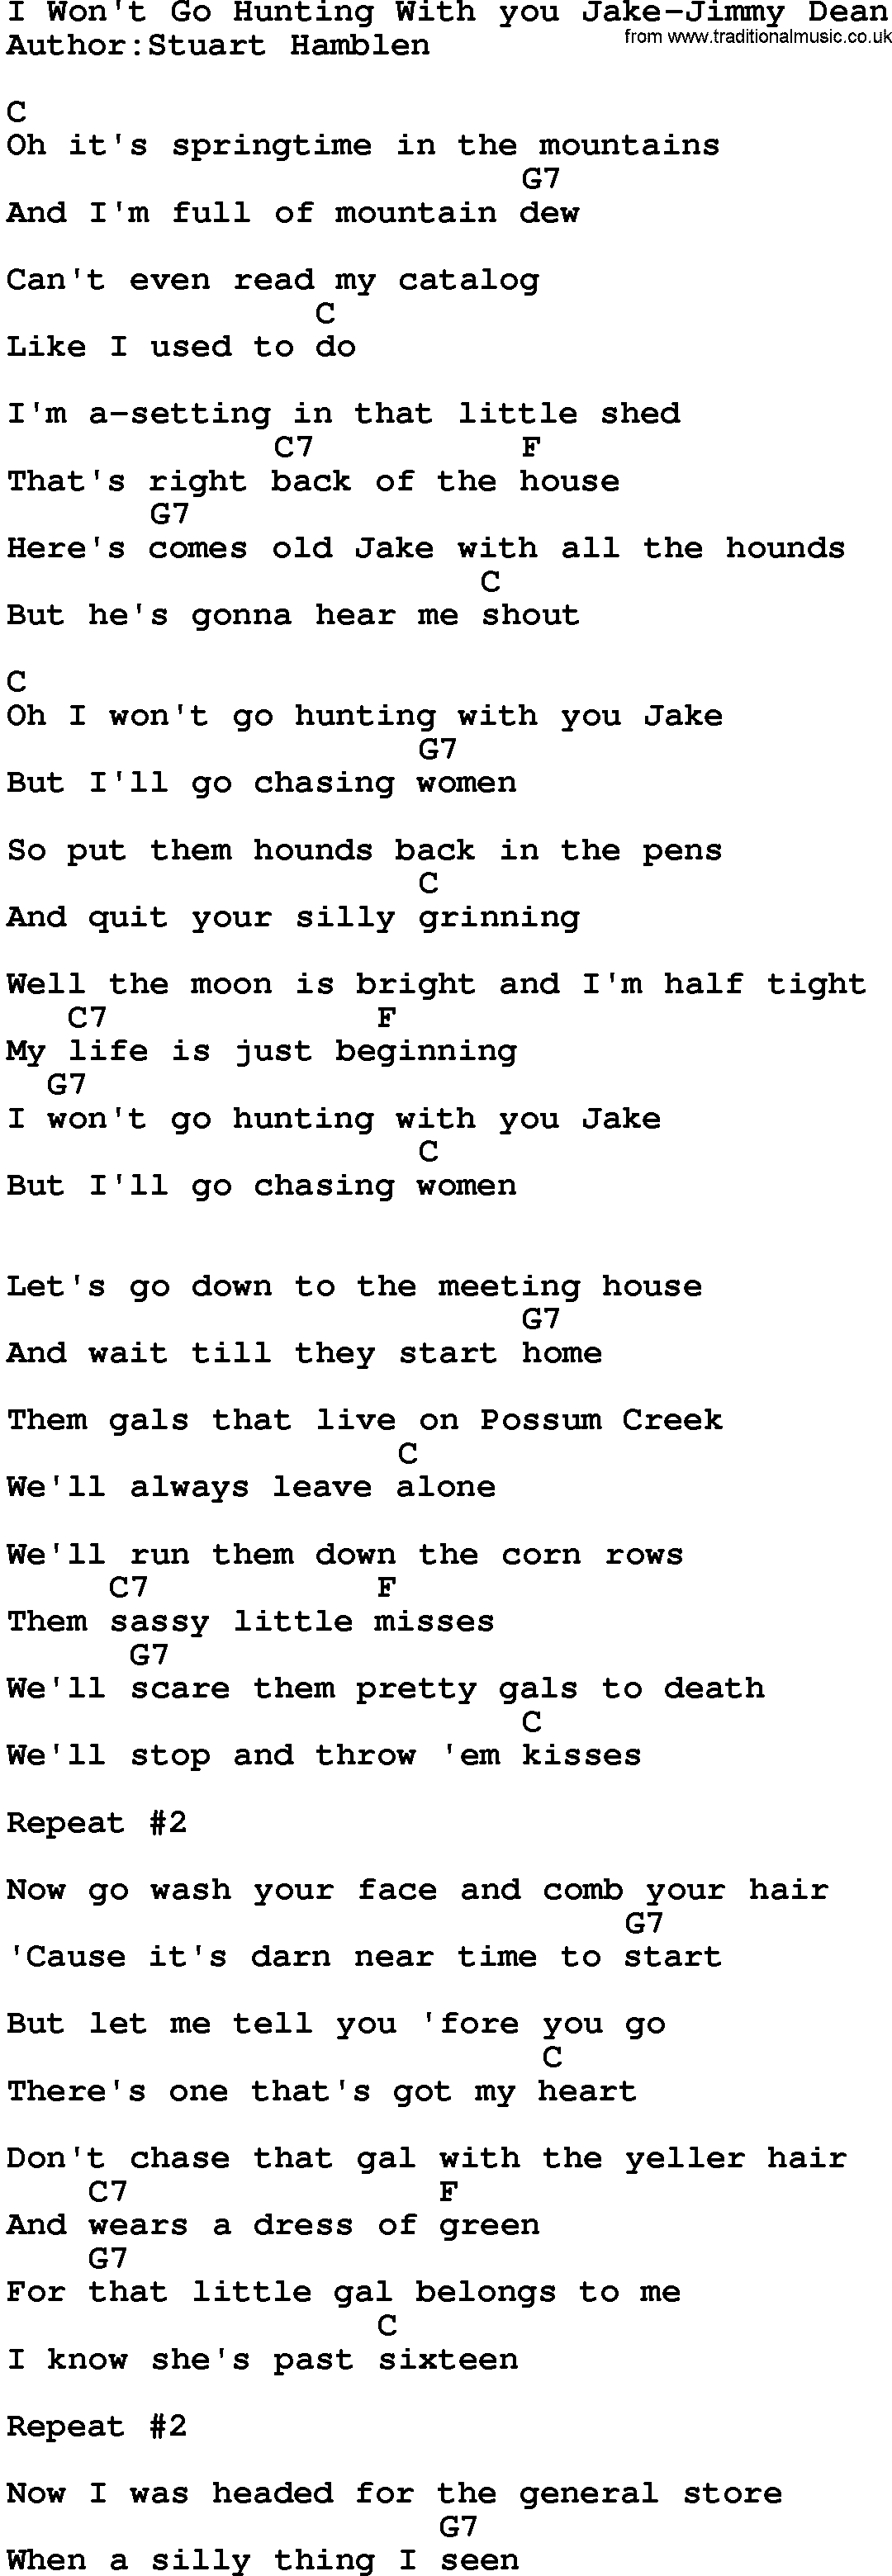 Country music song: I Won't Go Hunting With You Jake-Jimmy Dean lyrics and chords